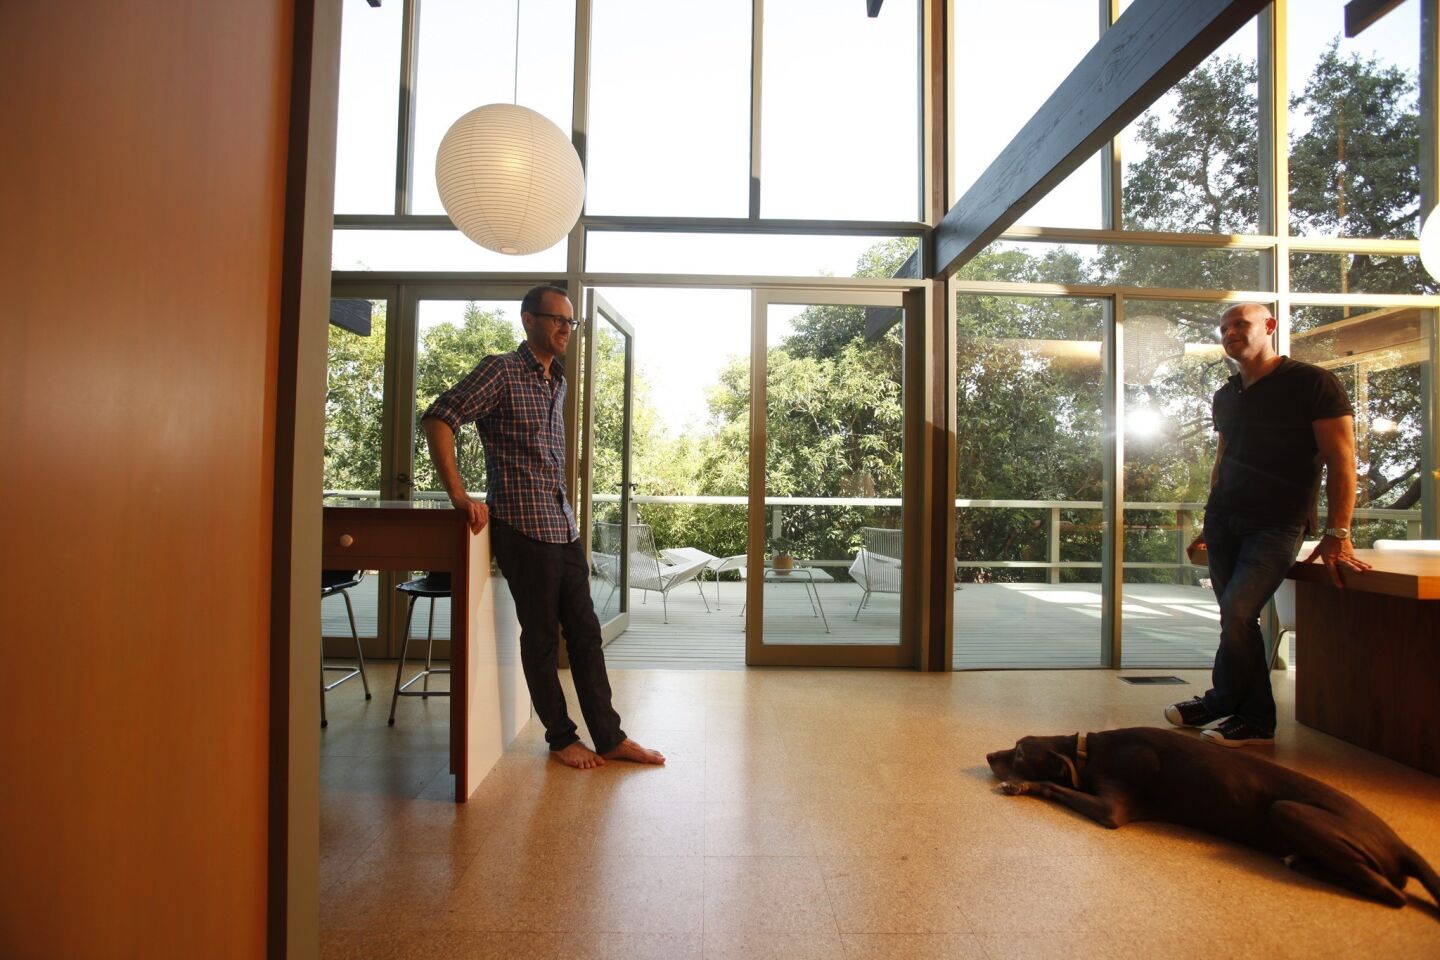 Owner Christophe Burusco, left, and designer Scott Lander in what today would be called a great room, with glass looking onto the rear deck and flooring made of cork.